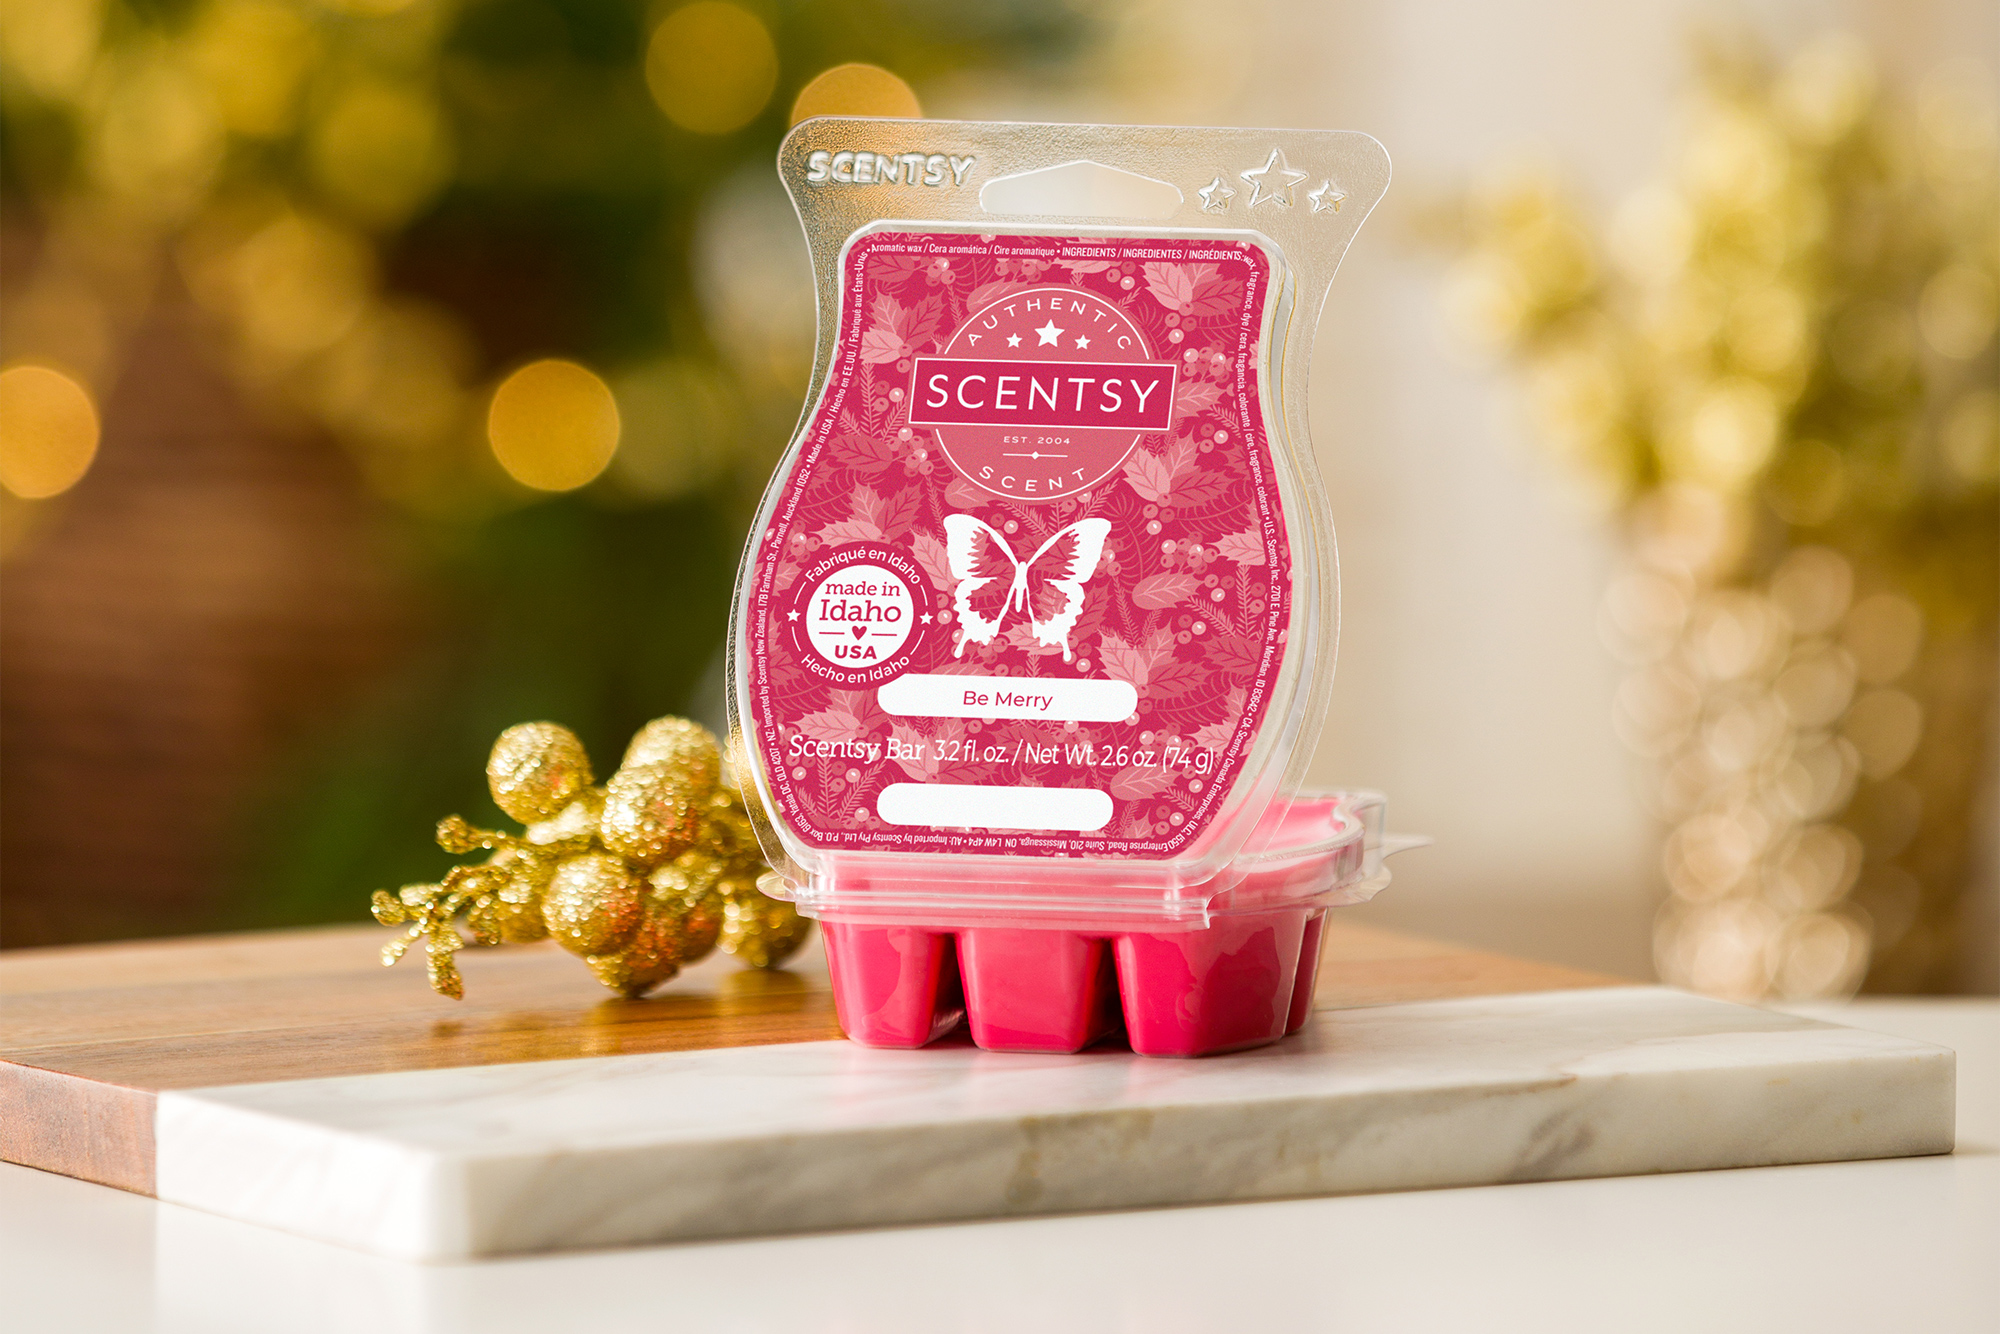 Scentsy's Be Merry clamshell